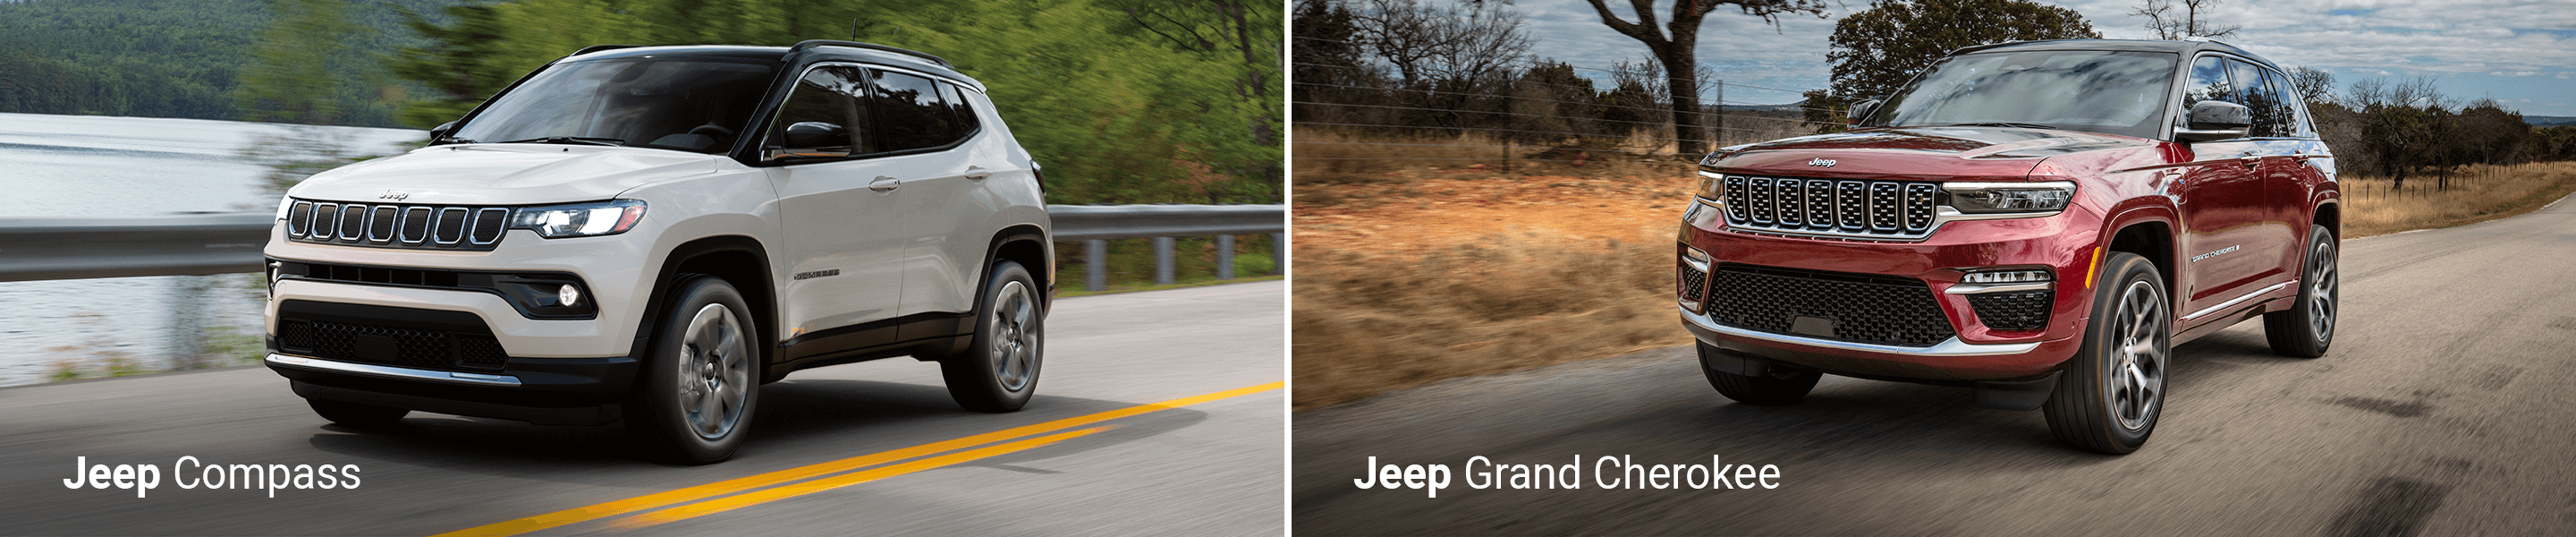 Jeep Compass Vs. Jeep Grand Cherokee: Which Is Right for You?